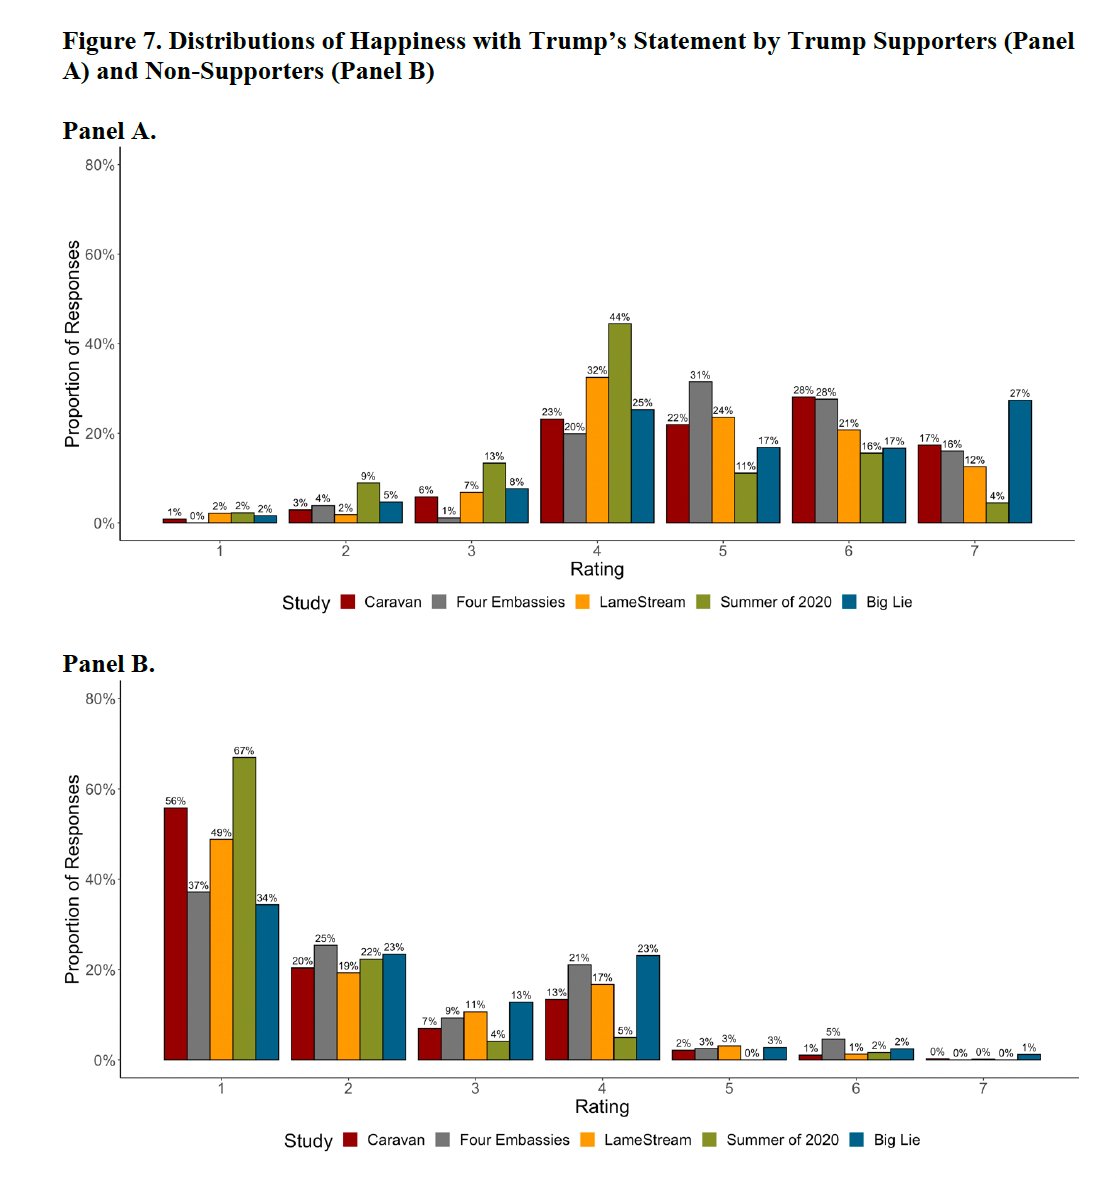 When politicians spread flagrant misinformation, their supporters do not necessarily believe it to be 'fact' but instead provide a moral justification of it revealing a deeper 'truth,' finds @minjaekim22 @ewzucker et al. doi.org/10.1086/730763